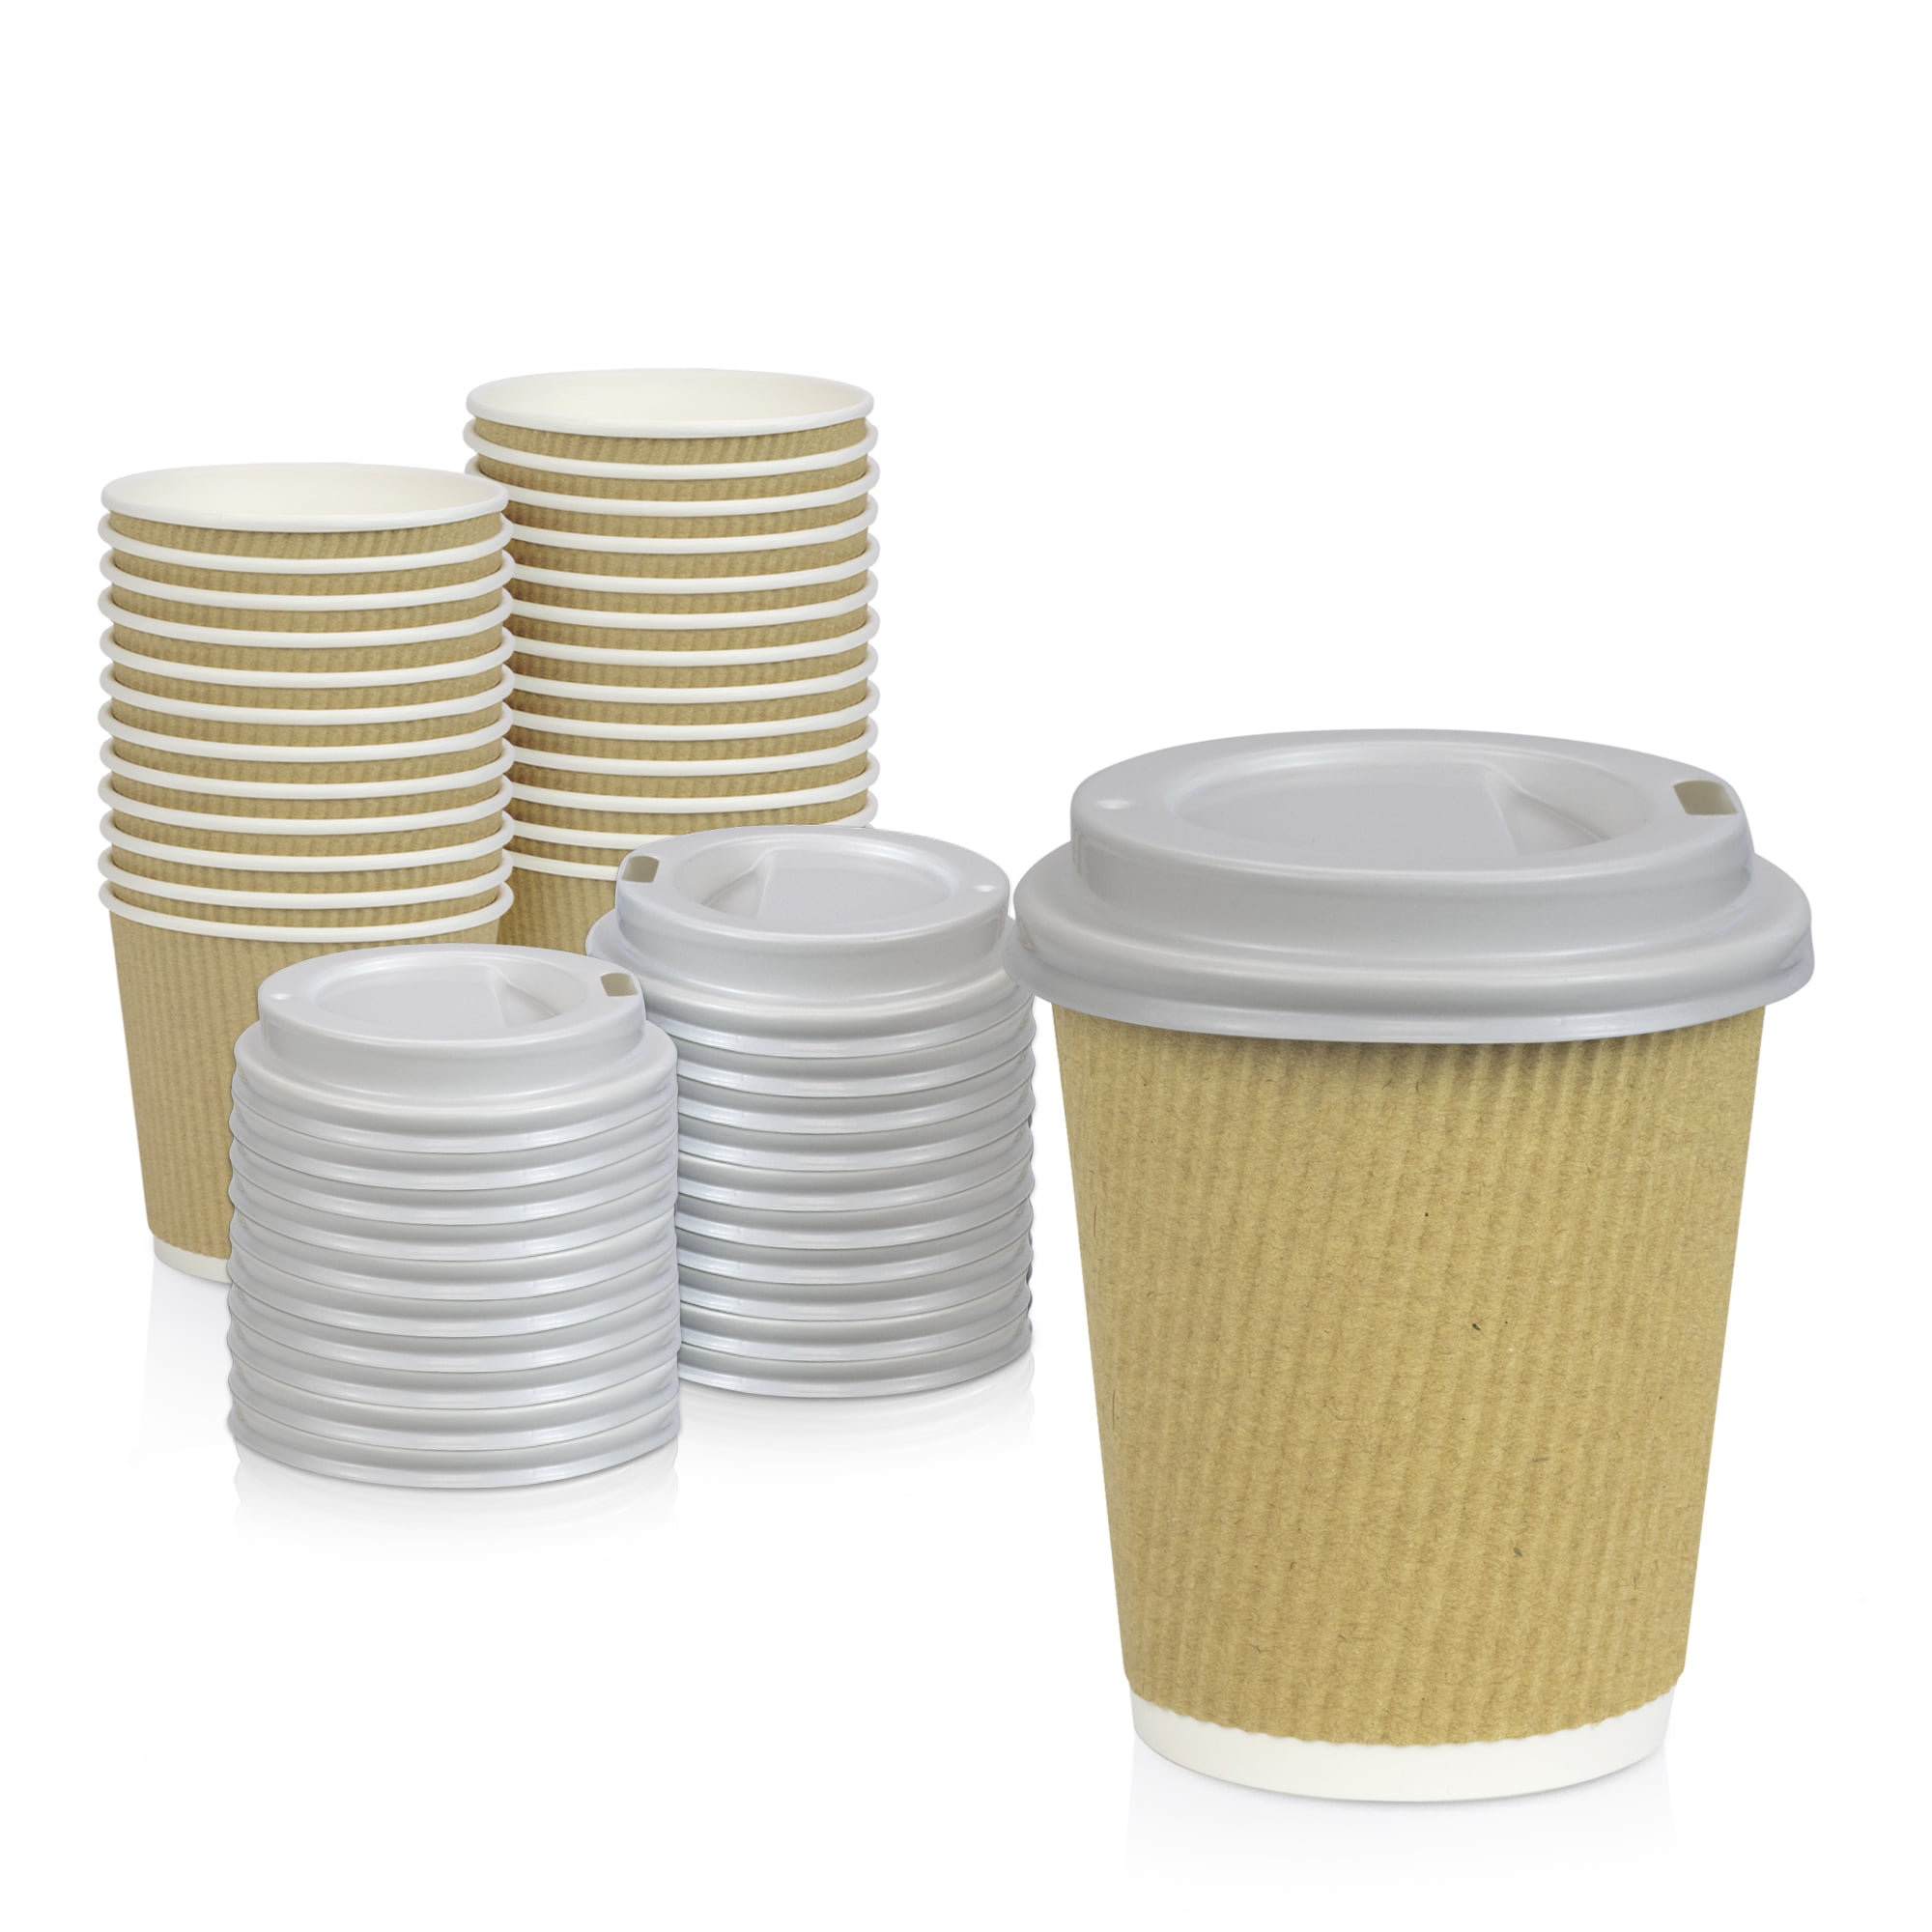 8 oz RippIe Wall Insulated Disposable Paper Coffee Cups with Lids 1000 PACK Details about    